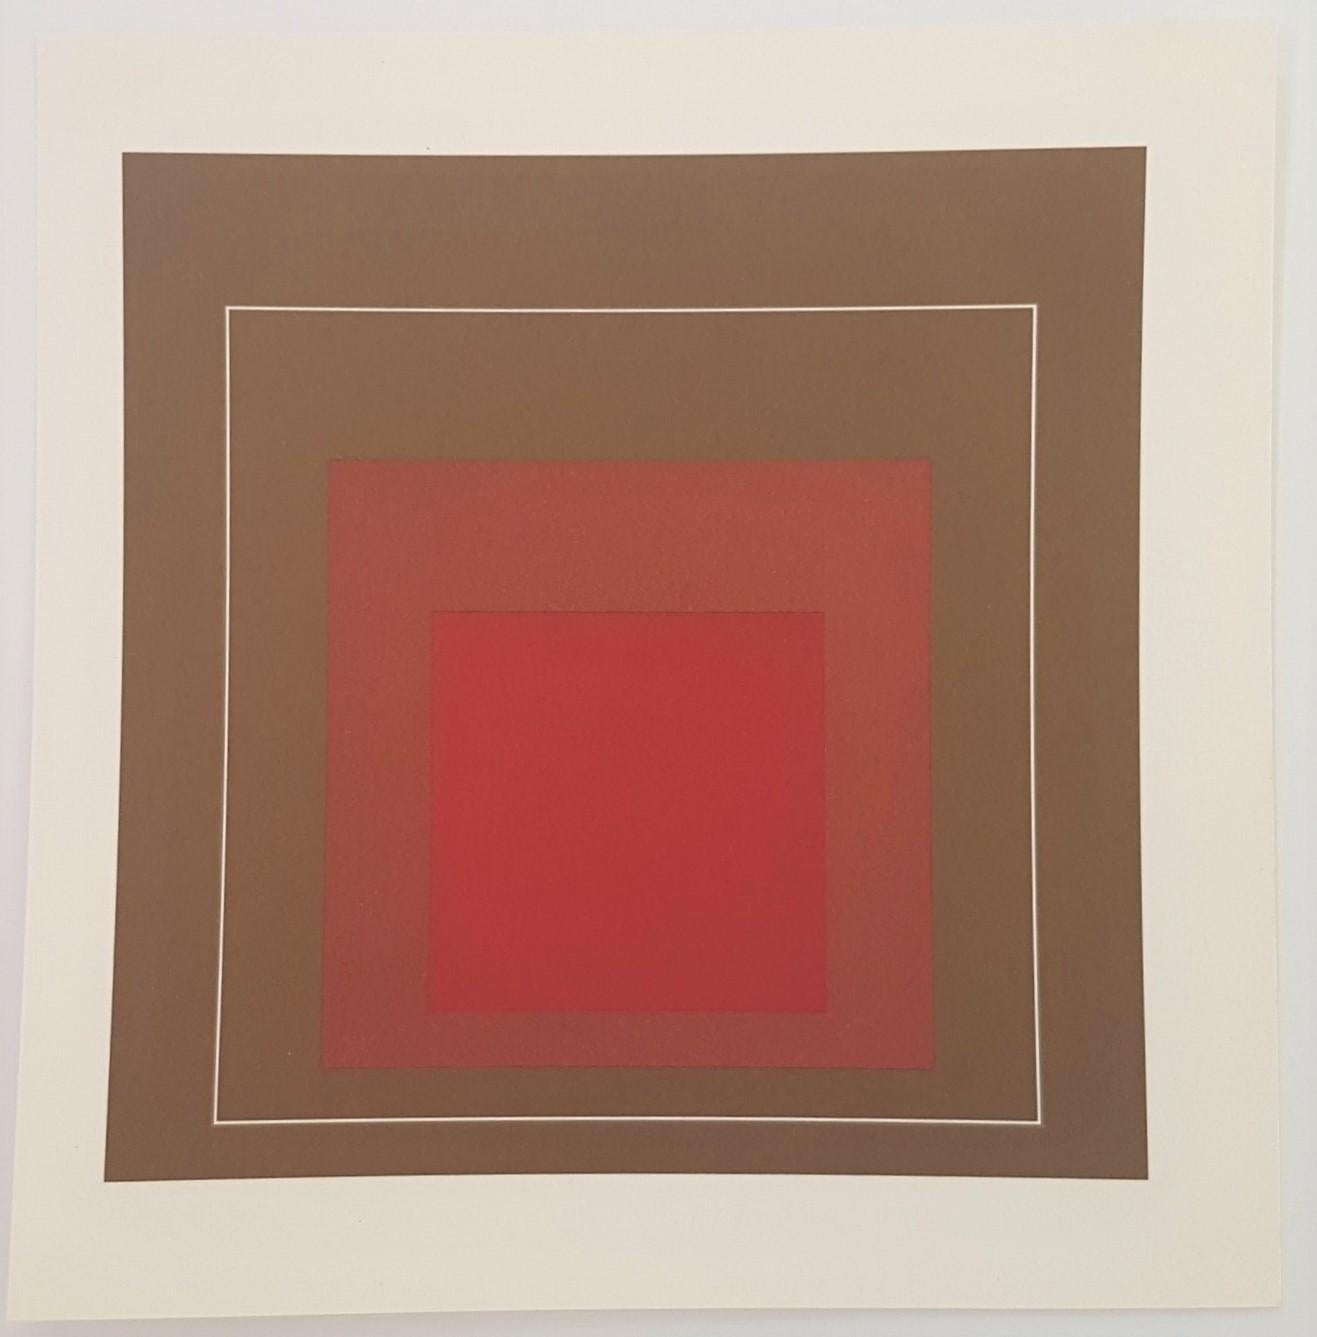 White Lines Squares (Bauhaus, Minimalist, Homage to the Square, Albers) - Print by (after) Josef Albers